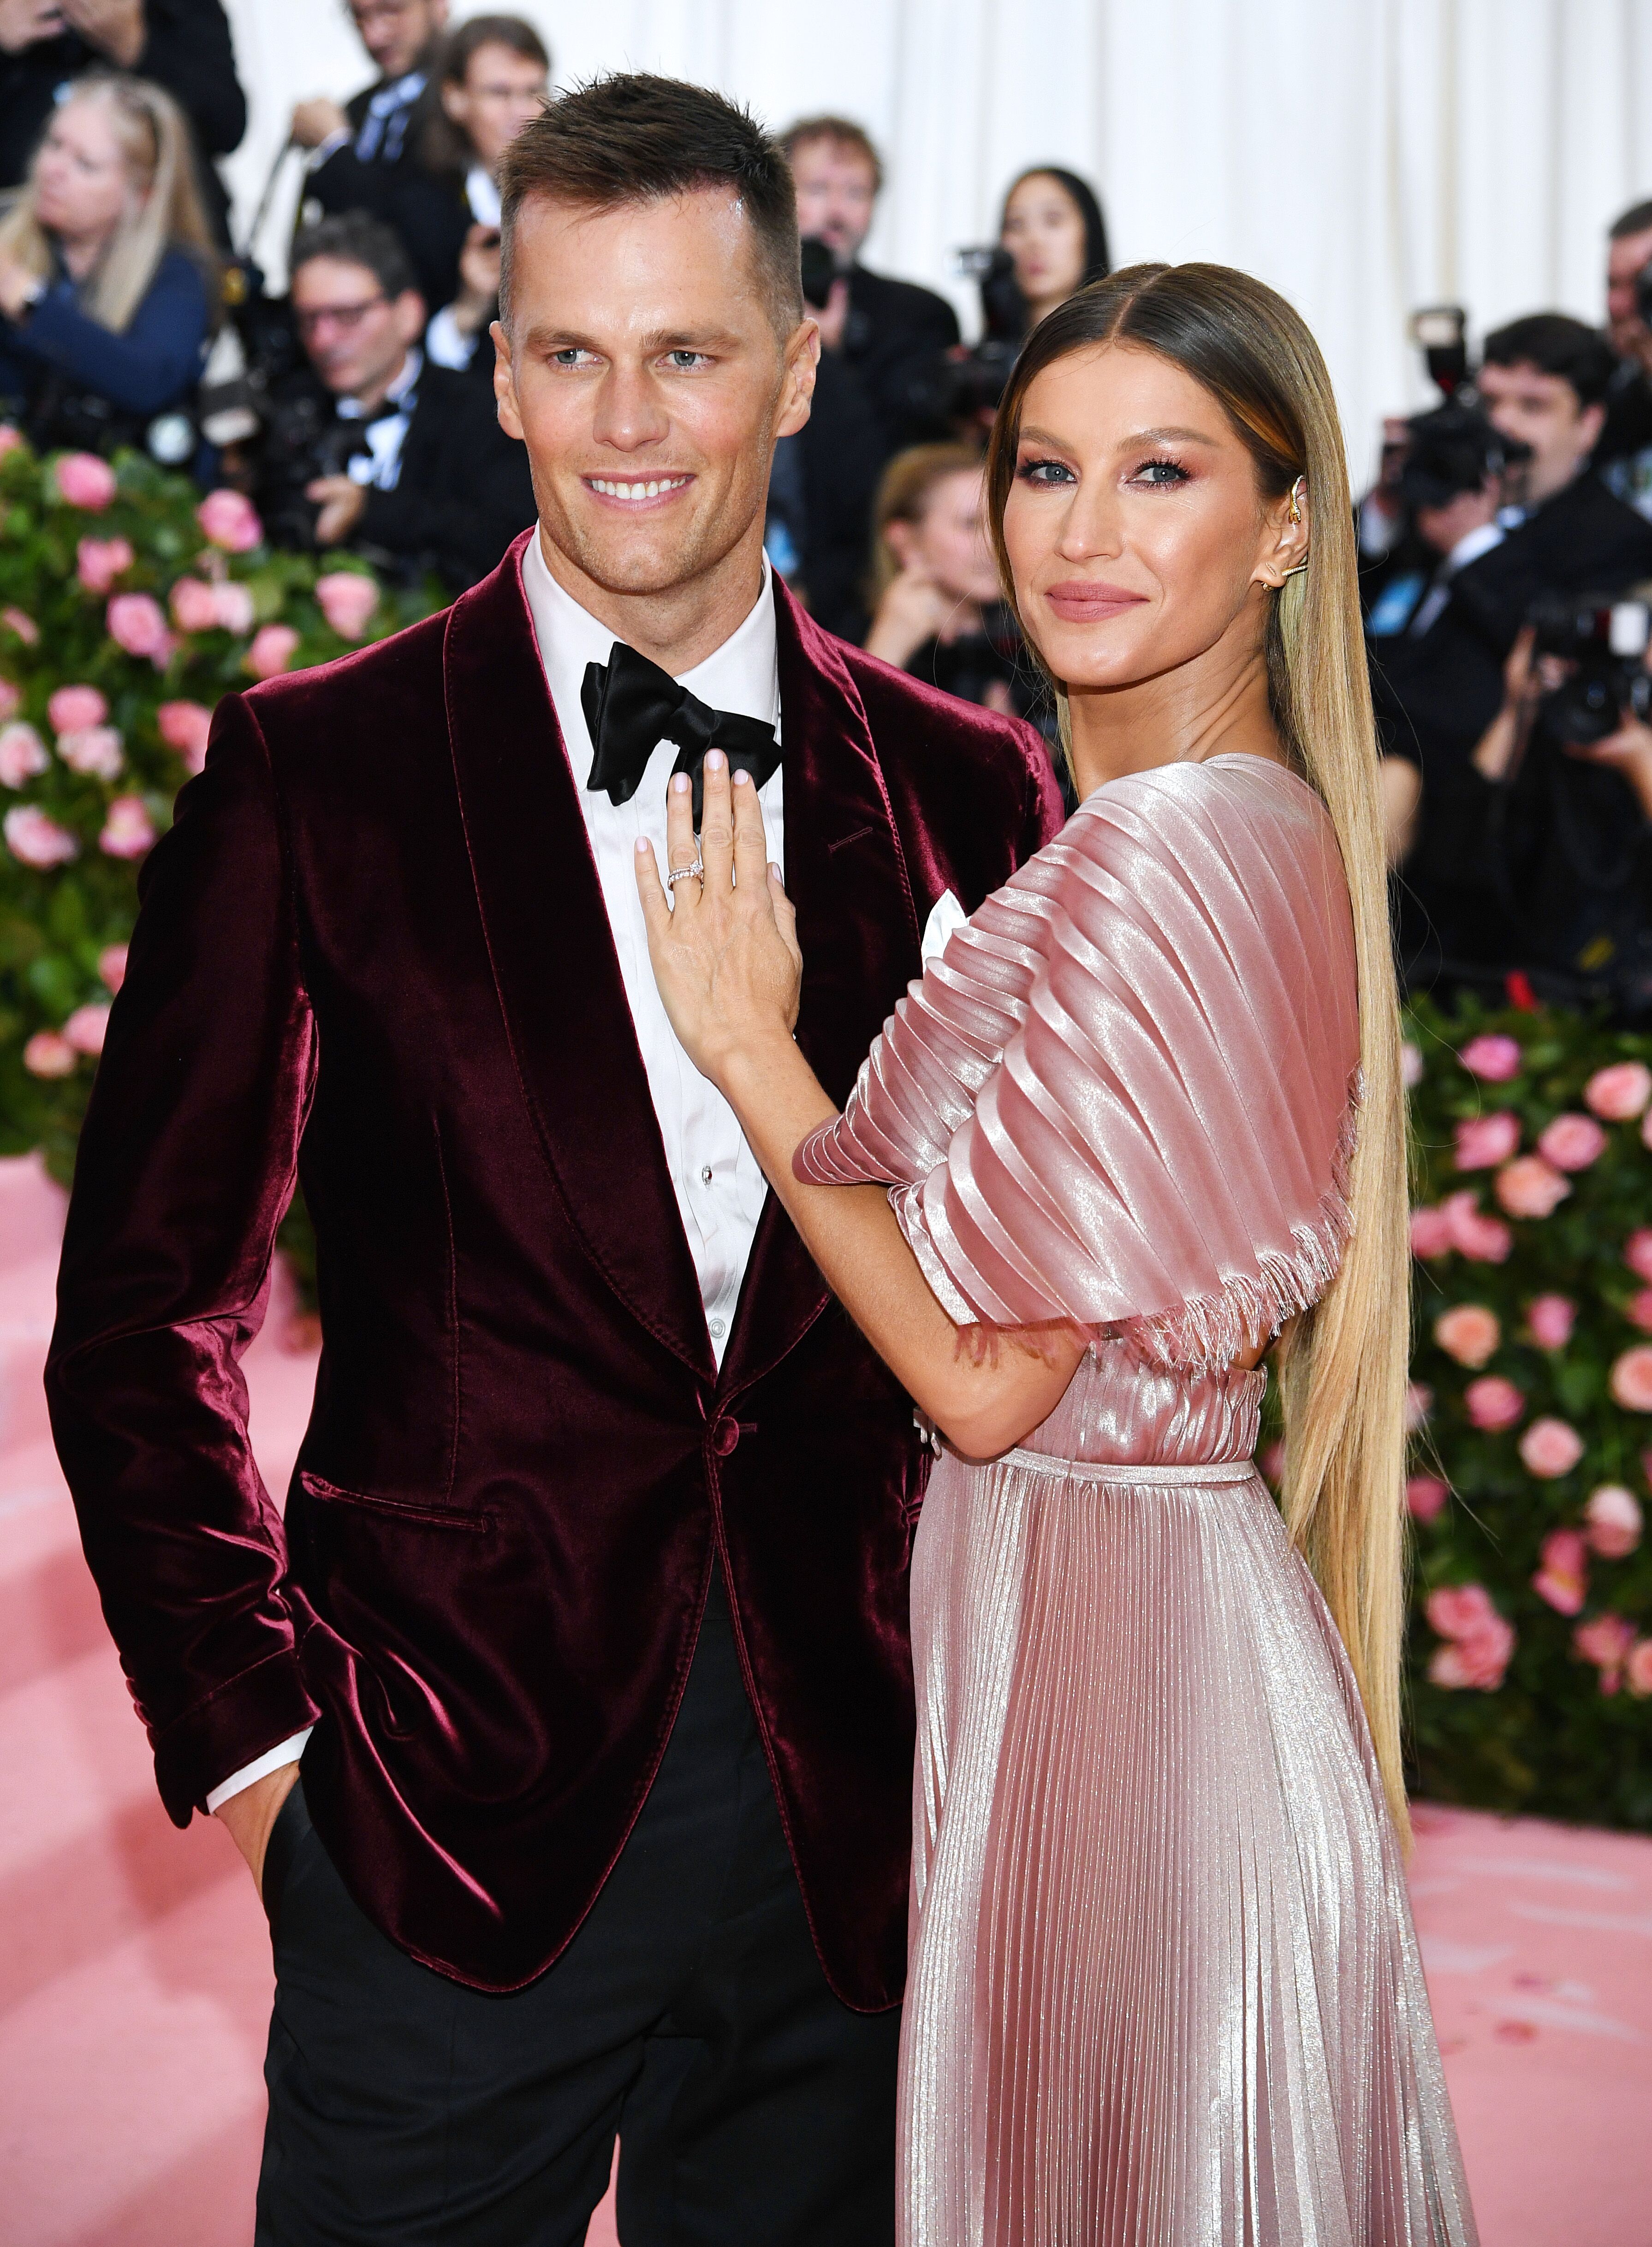 Gisele Bündchen and Tom Brady at the 2019 Met Gala in New York | Photo: Getty Images